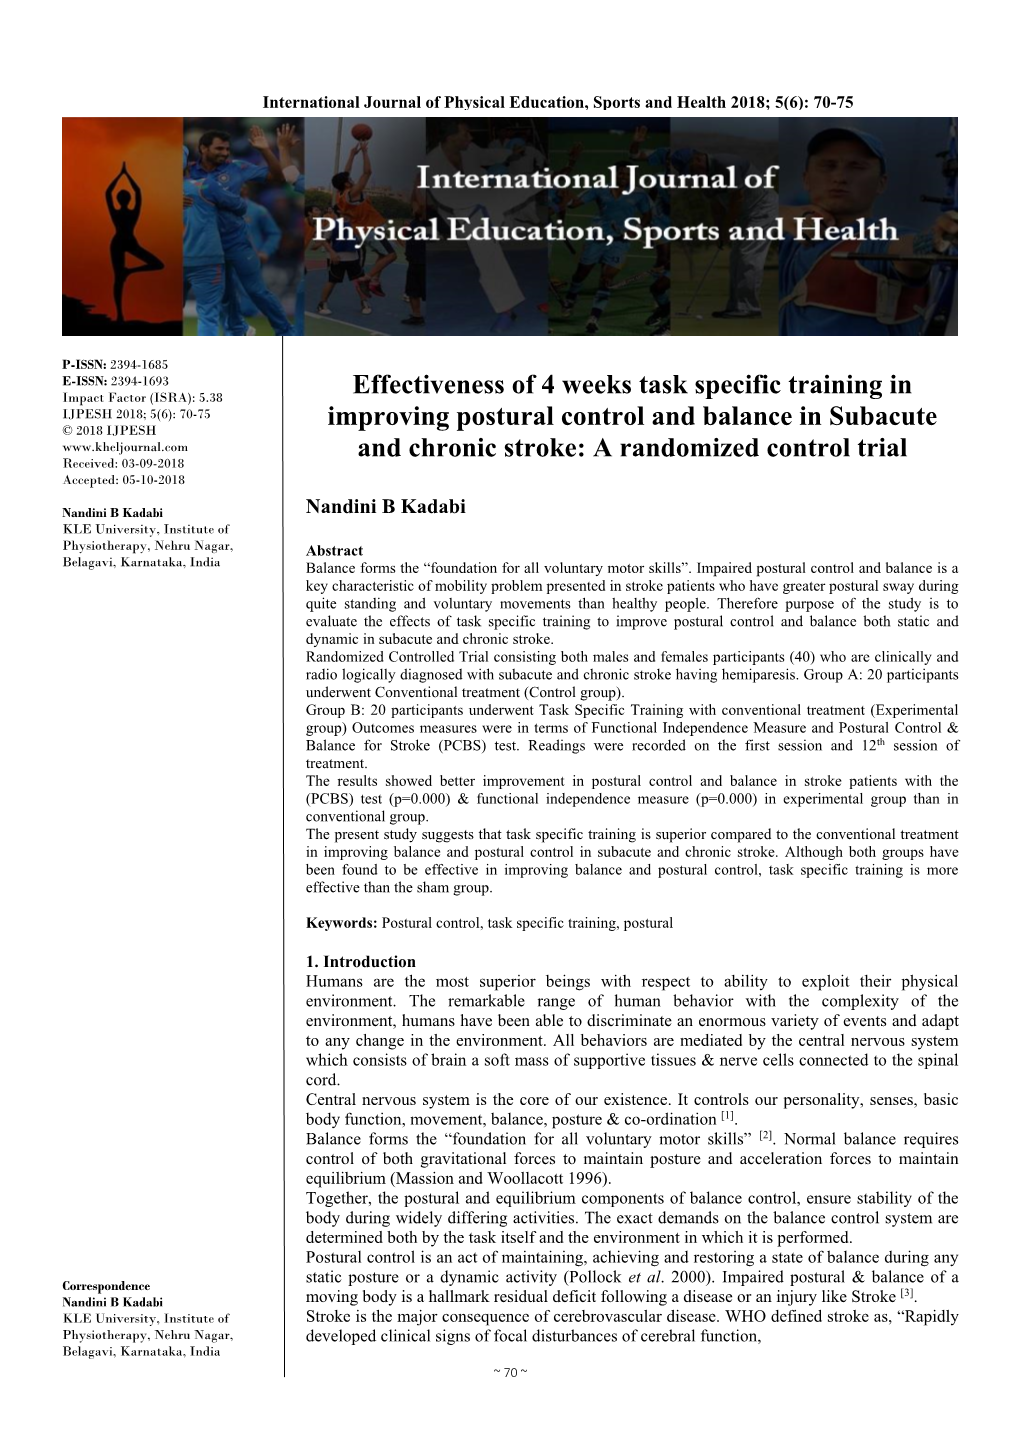 Effectiveness of 4 Weeks Task Specific Training in Improving Postural